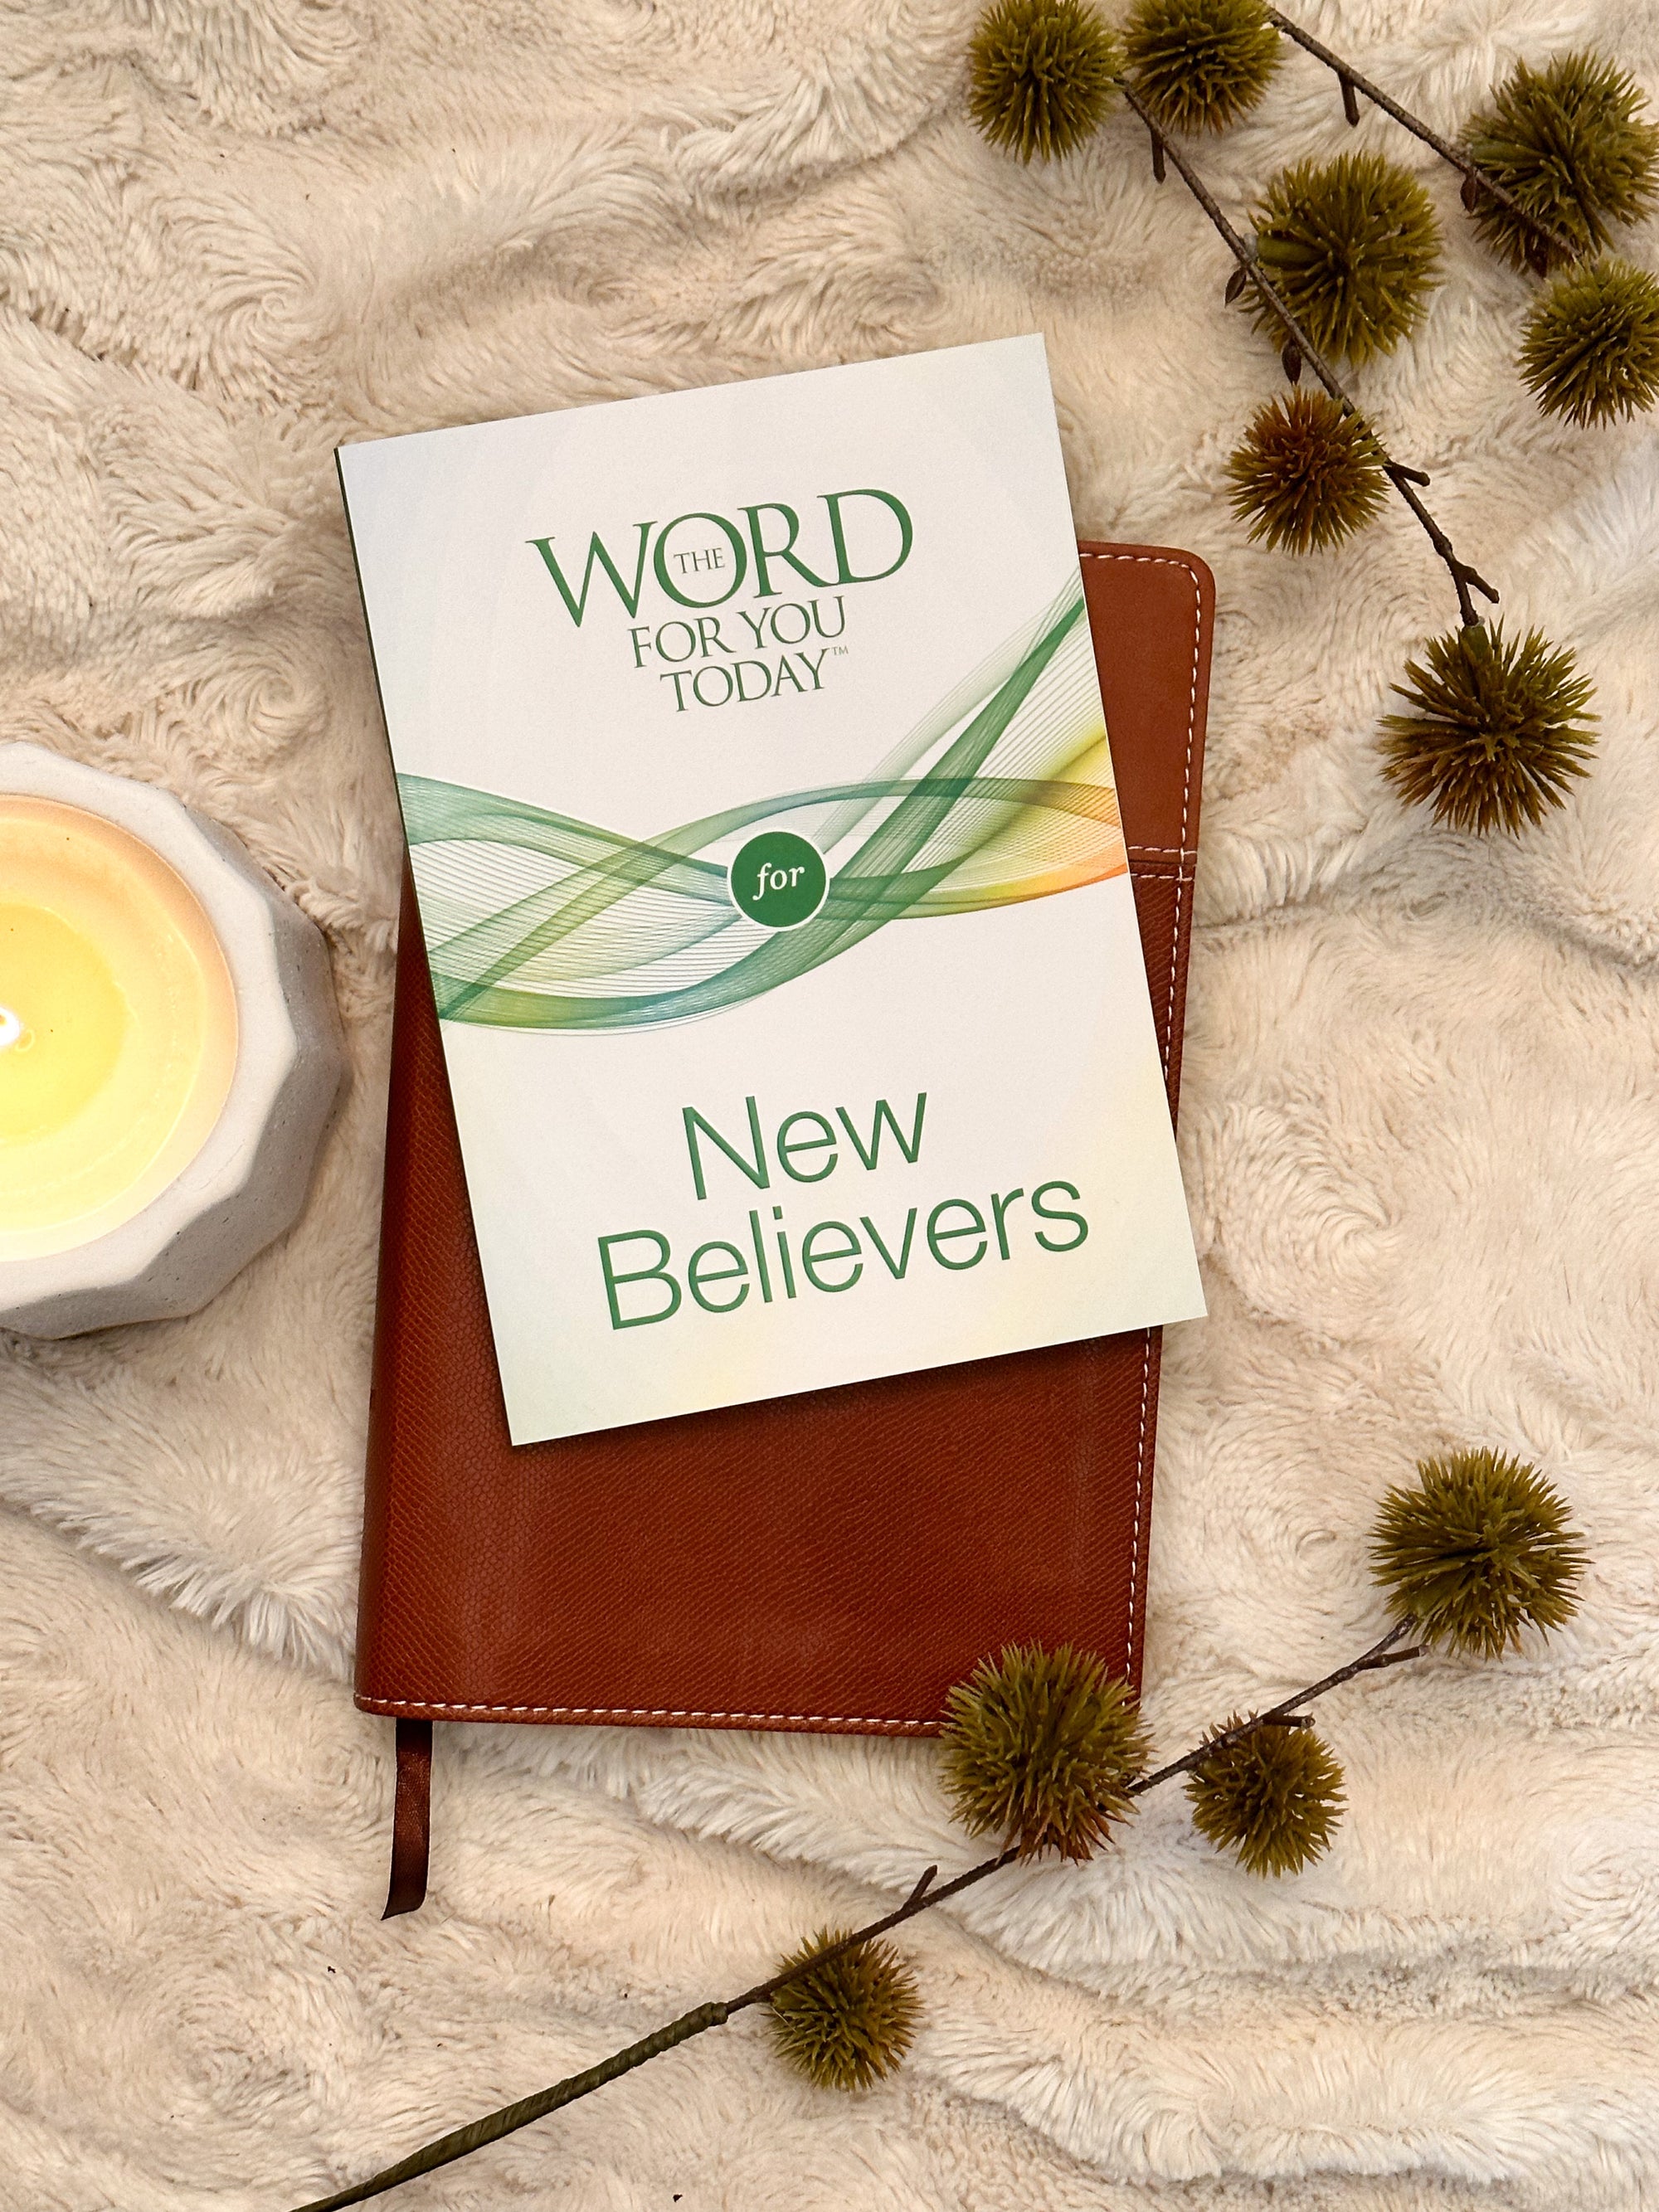 The Word For You Today for New Believers